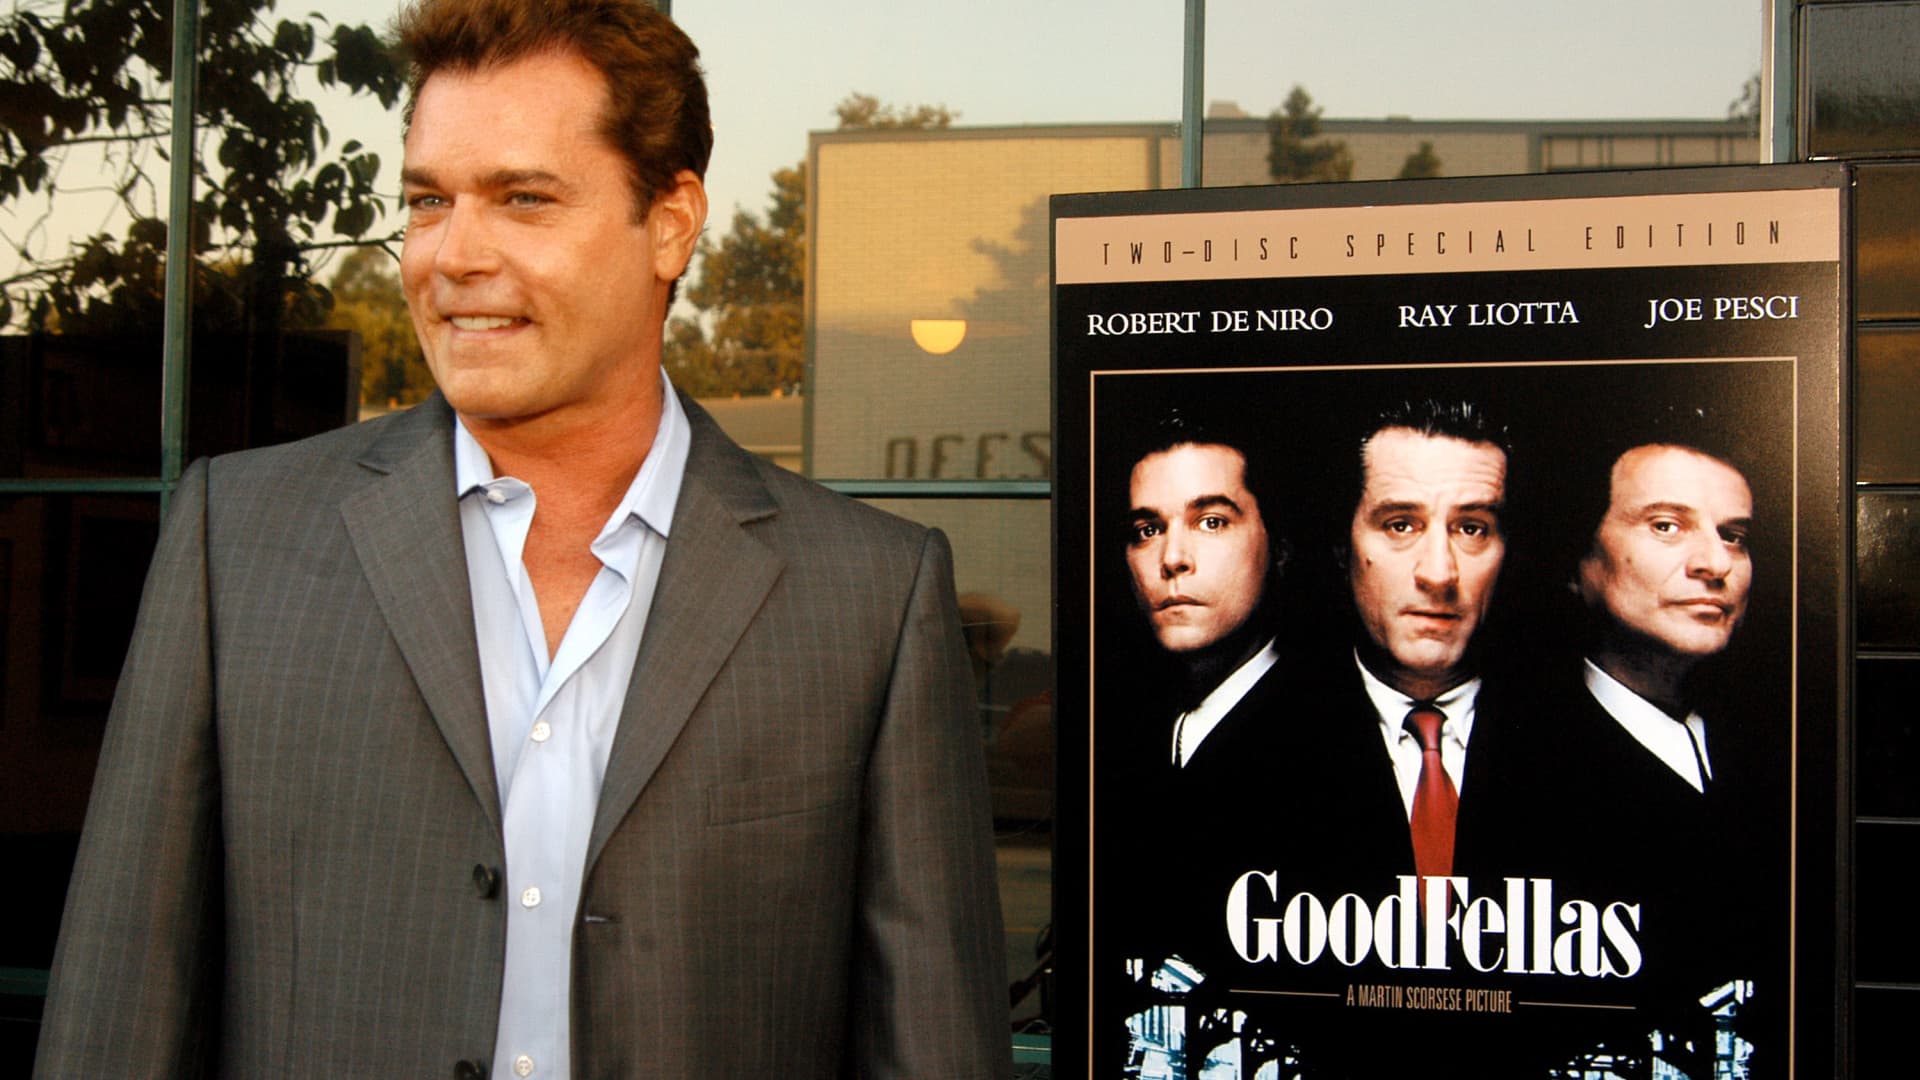 Ray Liotta, ‘Goodfellas’ star and gifted character actor, dies at 67